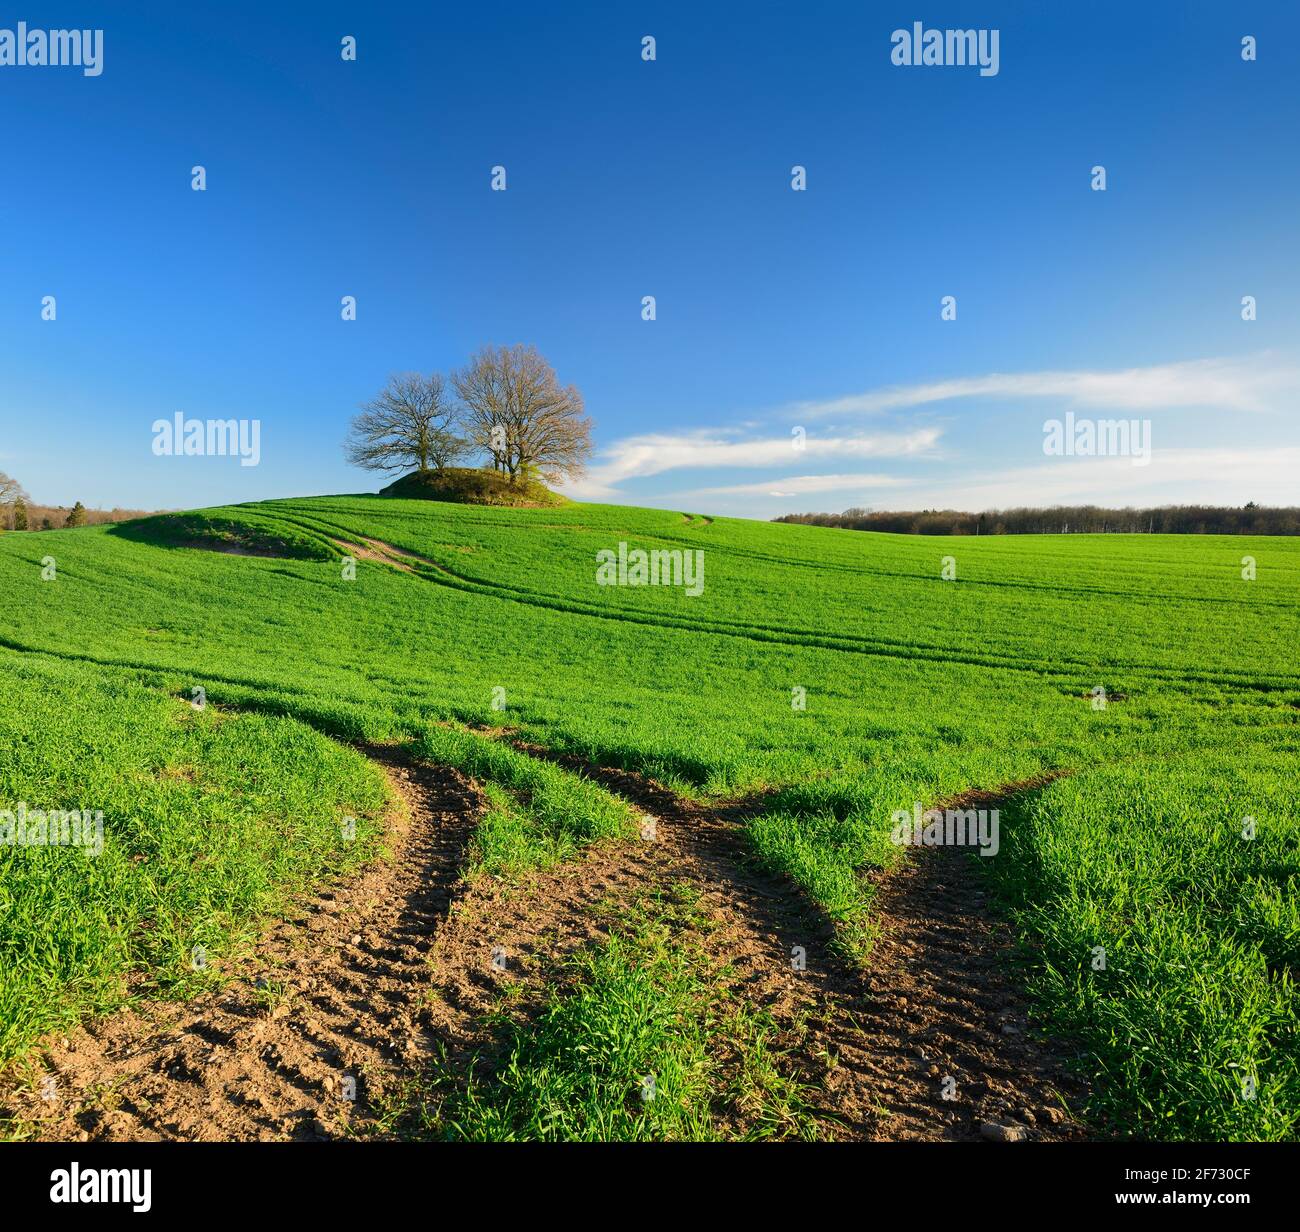 Green cornfield in spring with lane, blue sky, on the horizon a prehistoric burial mound, near Krakow am See, Mecklenburg-Vorpommern, Germany Stock Photo